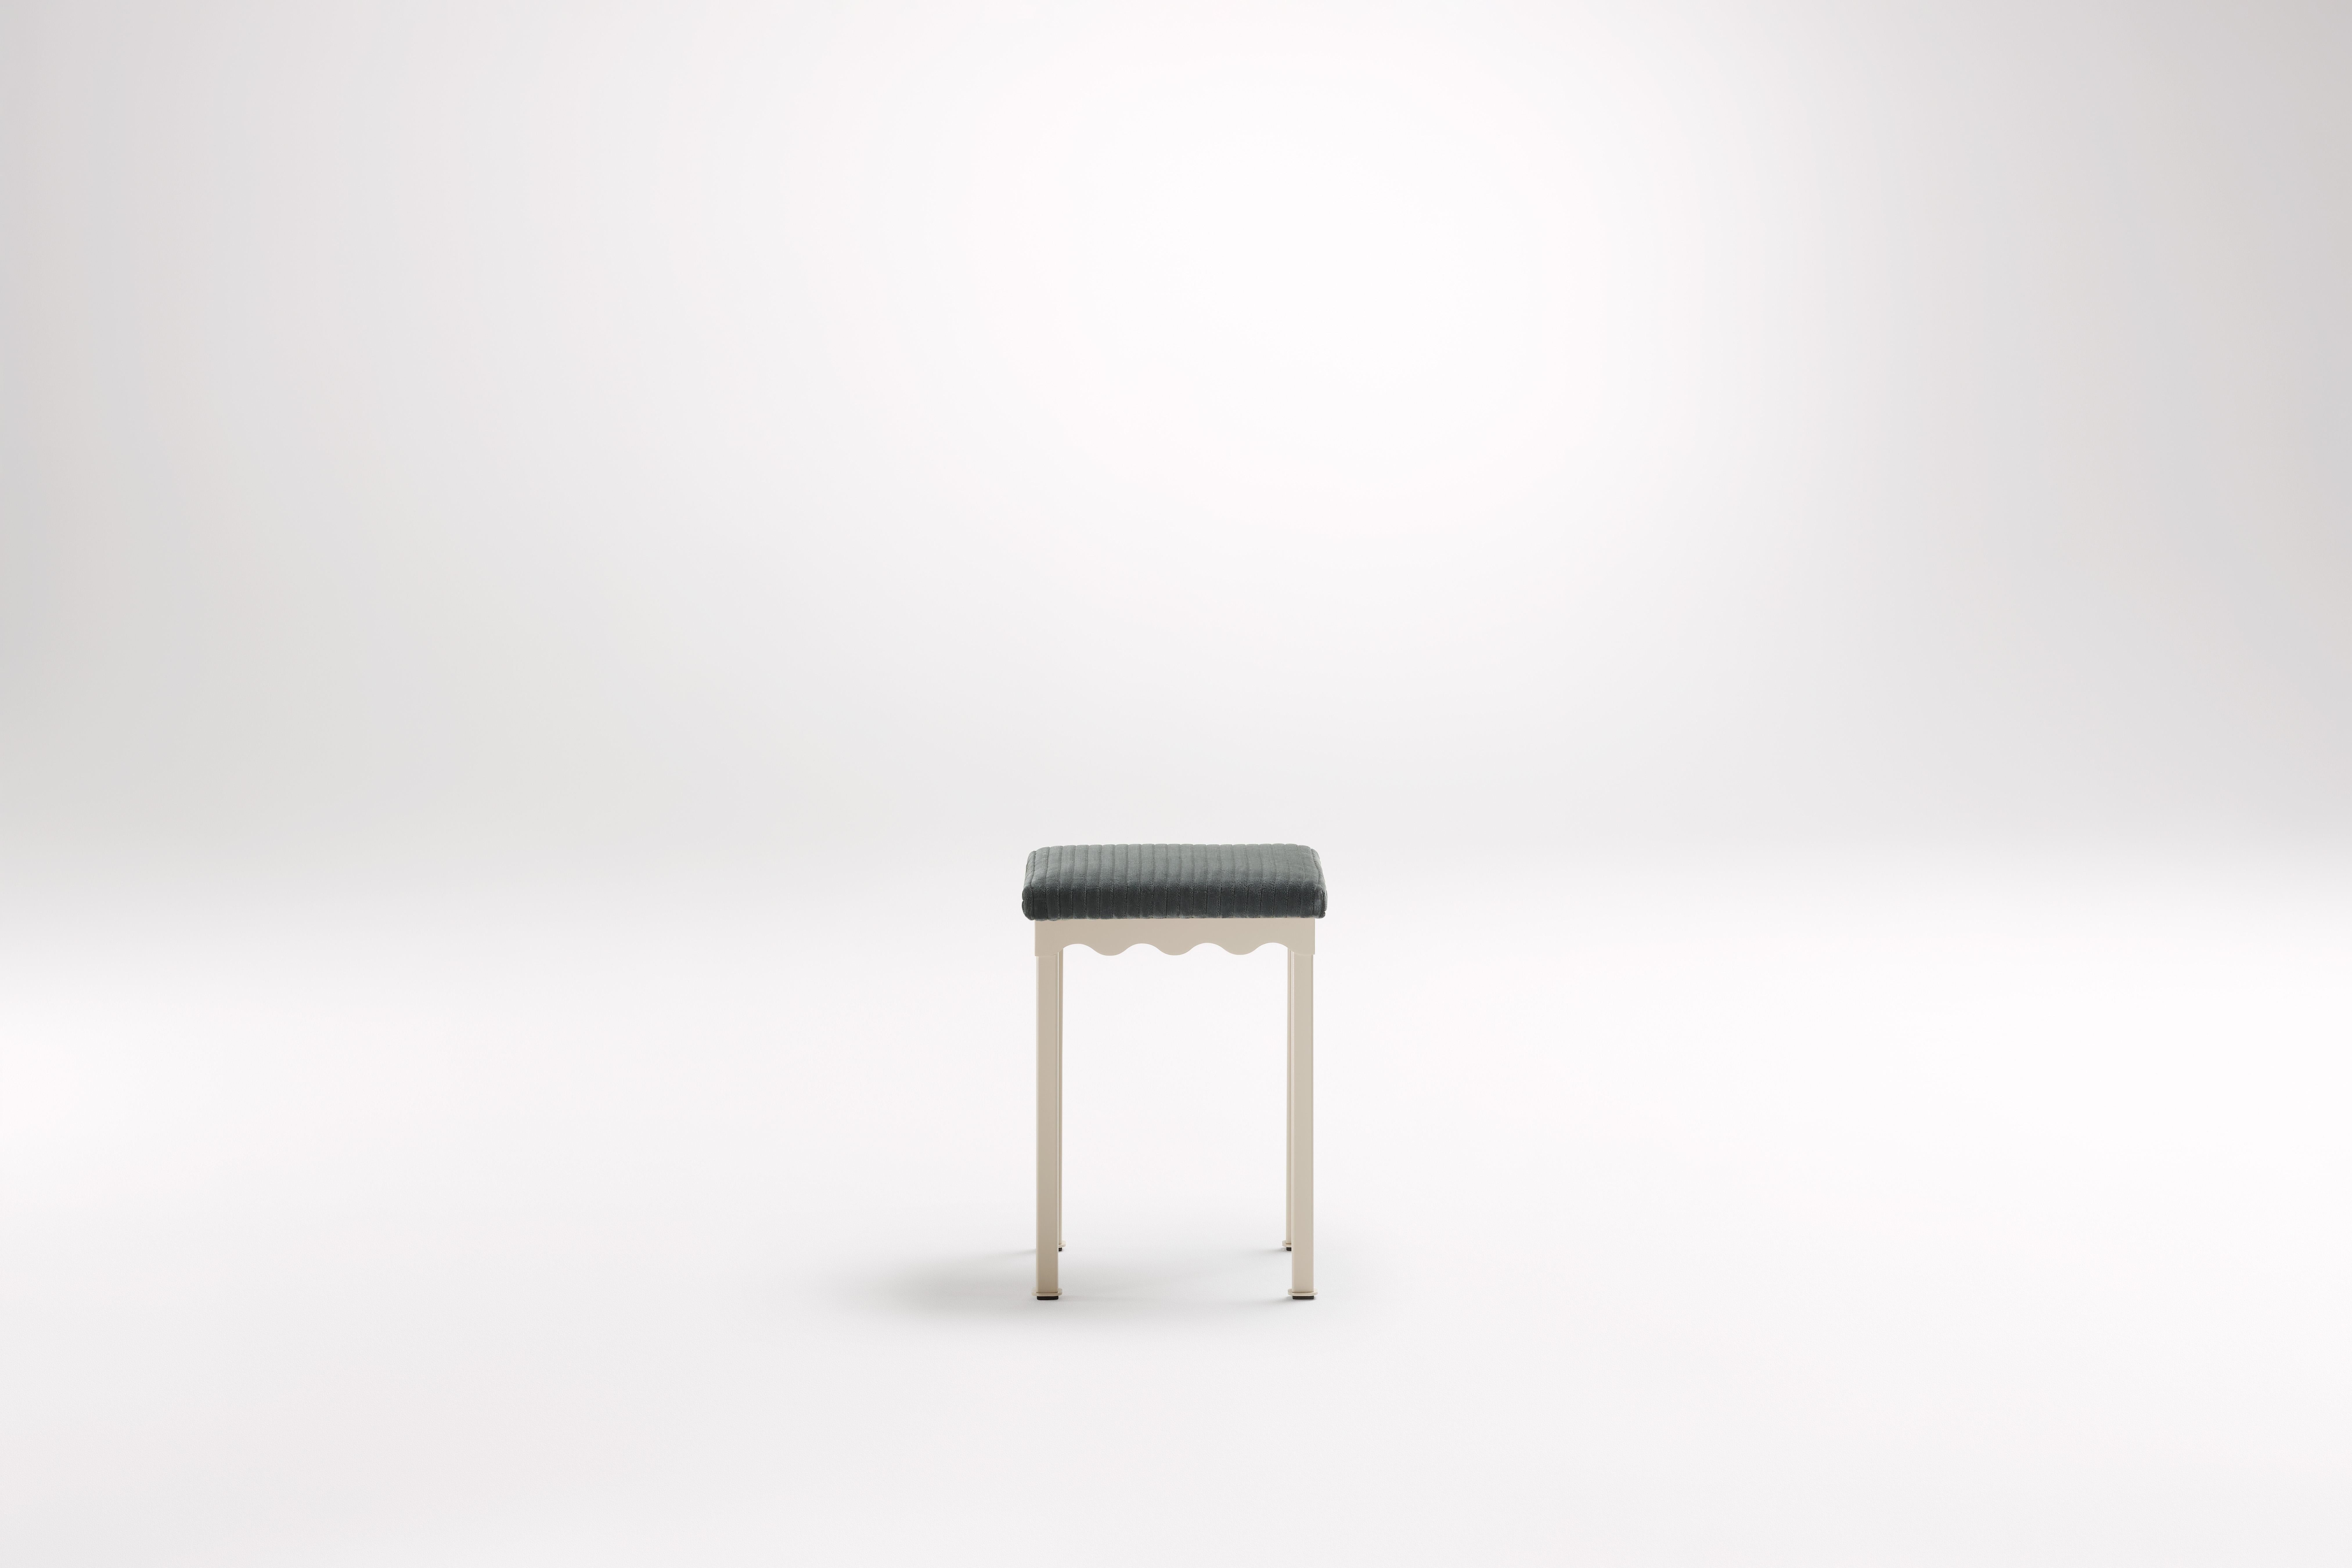 Marmoset Bellini Low Stool by Coco Flip
Dimensions: D 34 x W 34 x H 45 cm
Materials: Timber / Stone tops, Powder-coated steel frame. 
Weight: 5 kg
Frame Finishes: Textura Paperbark.

Coco Flip is a Melbourne based furniture and lighting design